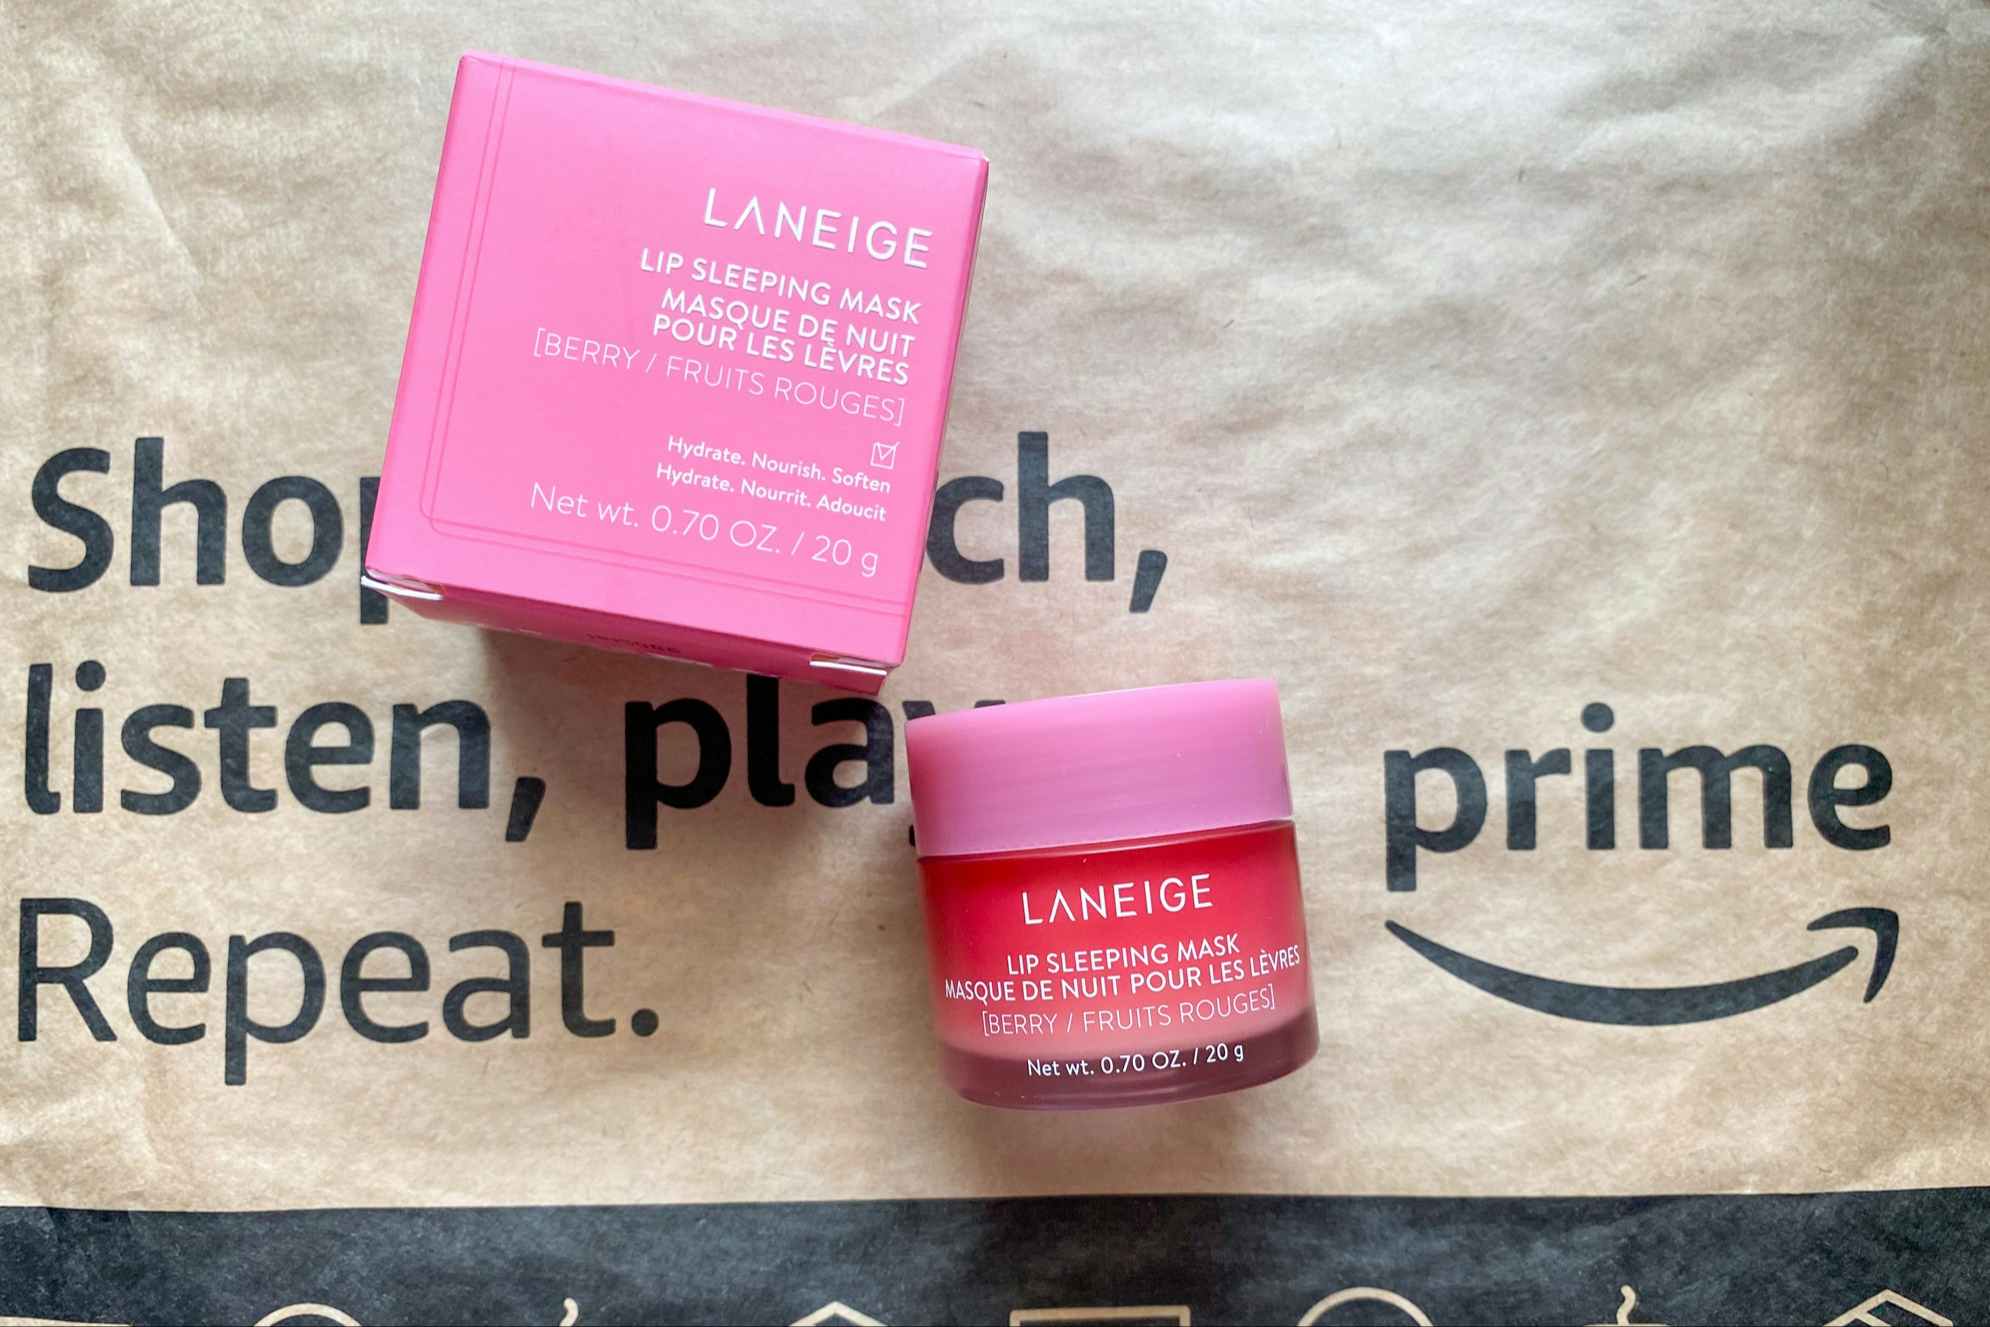 Laneige's Bestsellers, Now as Low as $12.83 on Amazon